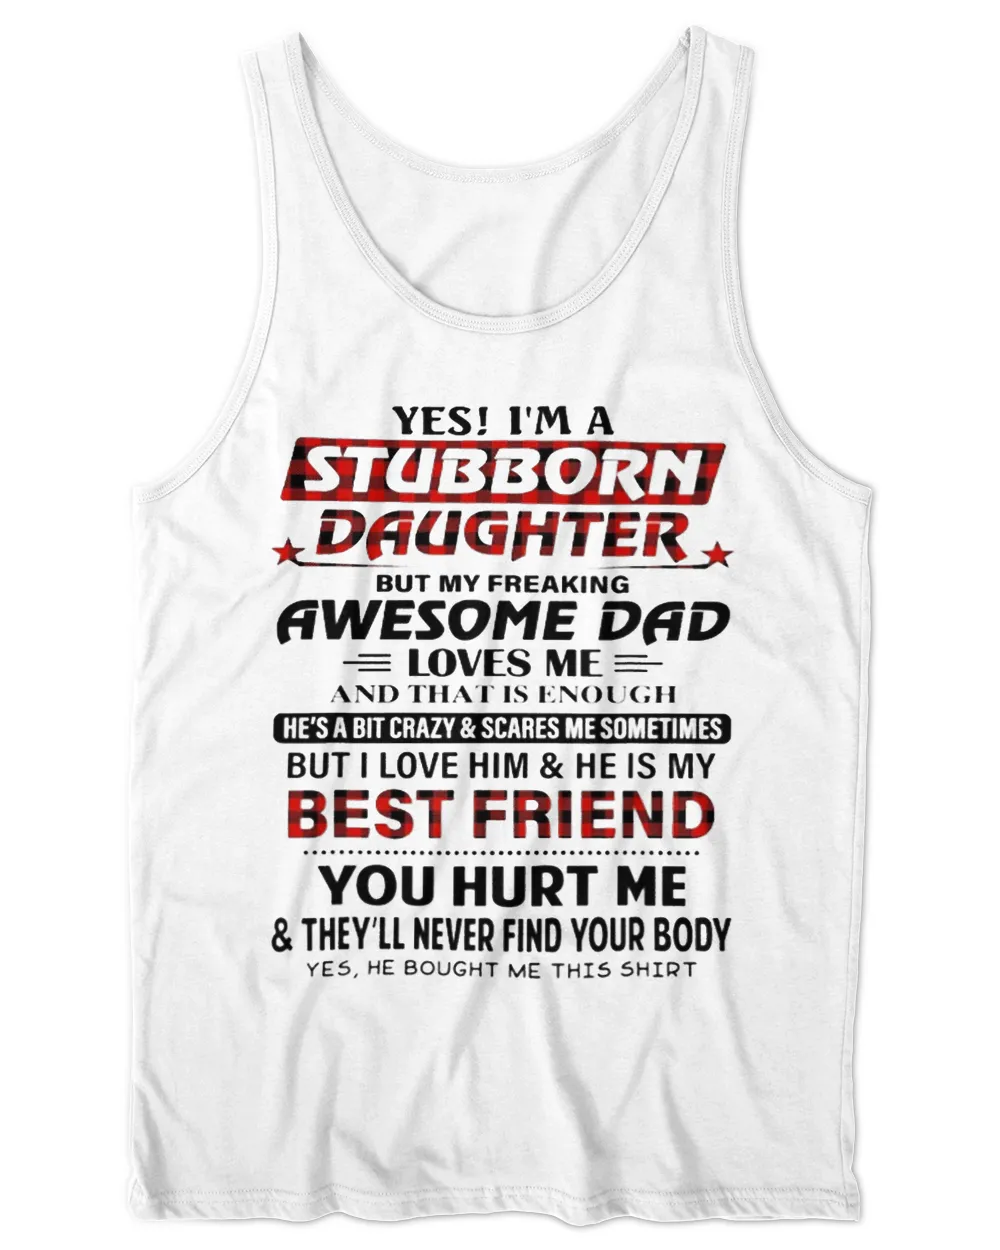 Yes im a stubborn daughter but my freaking awesome dad